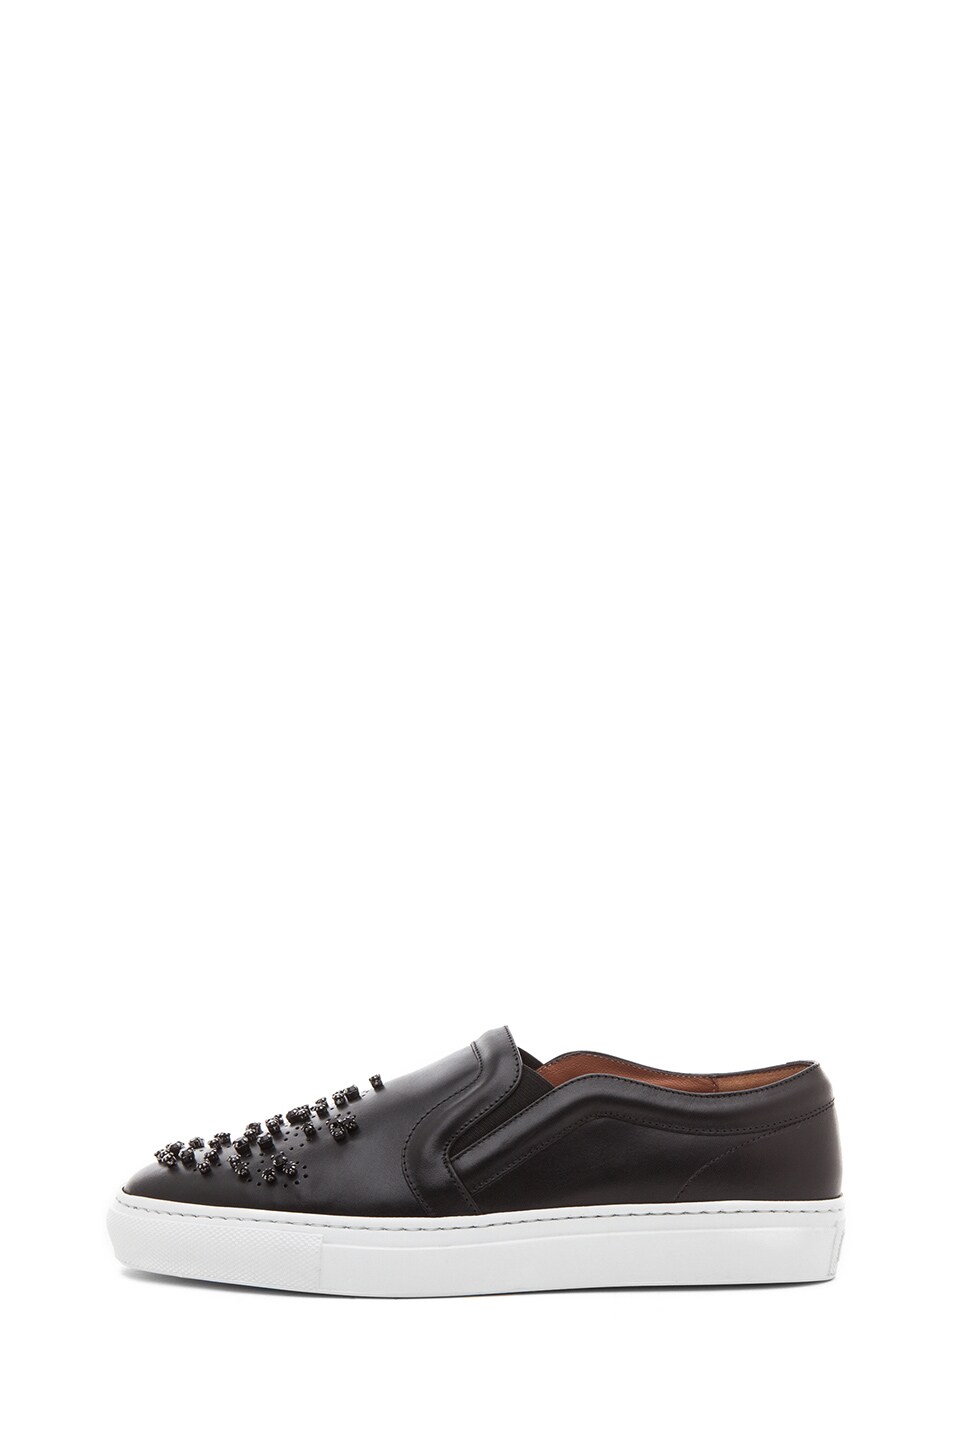 Givenchy Calfskin Leather Skate Shoes in Black | FWRD